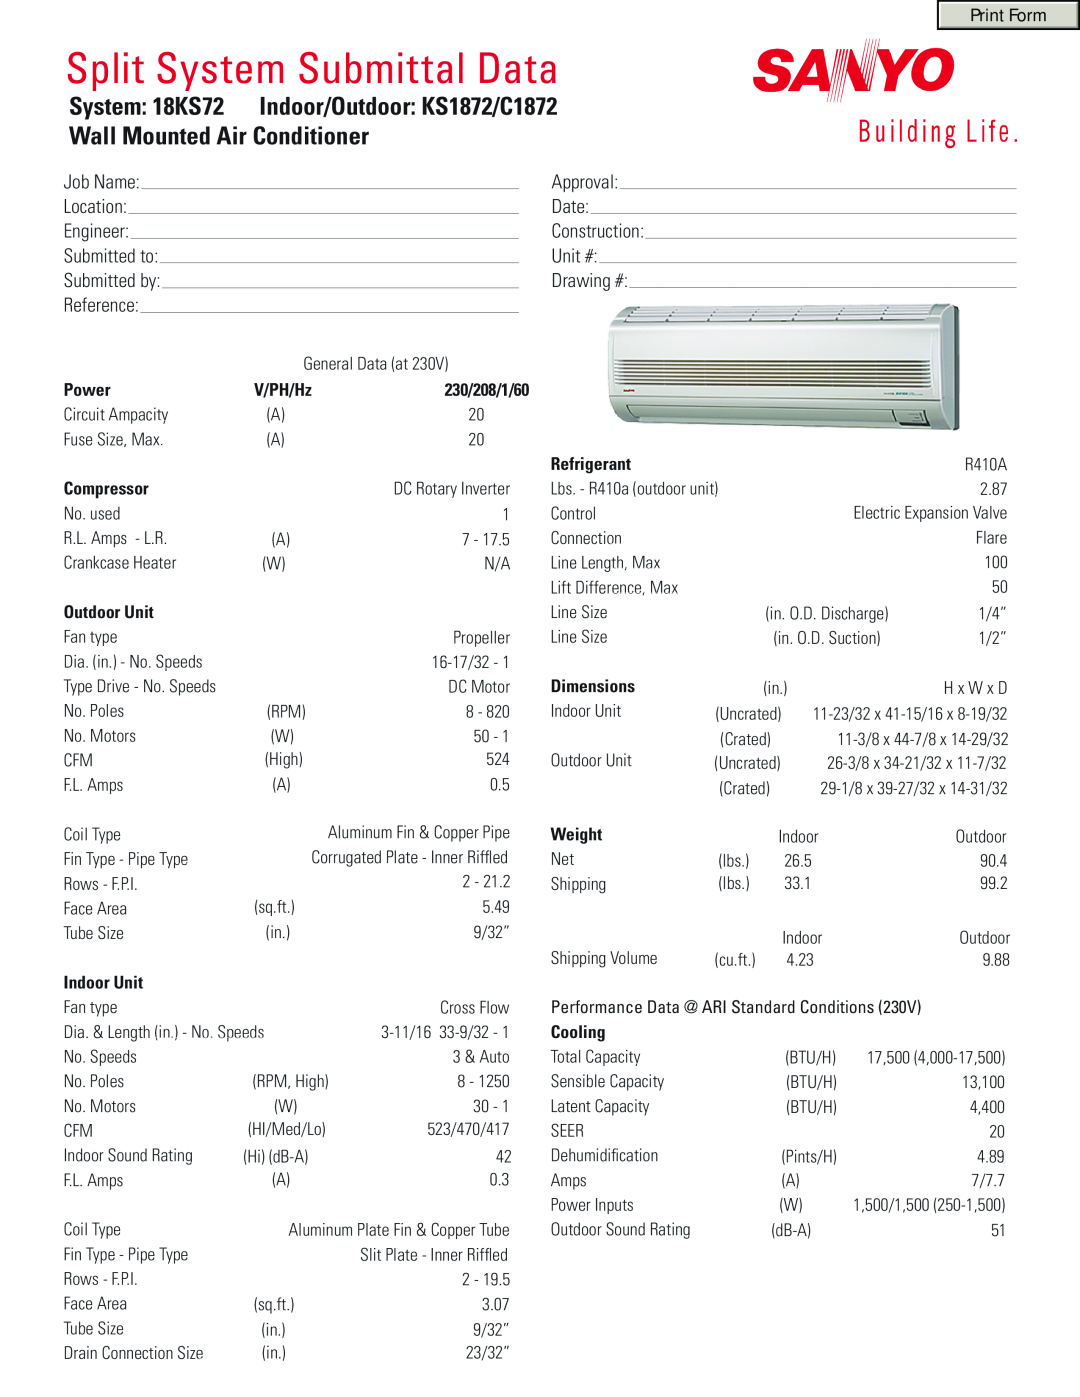 Sanyo dimensions Split System Submittal Data, System 18KS72 Indoor/Outdoor KS1872/C1872, Wall Mounted Air Conditioner 